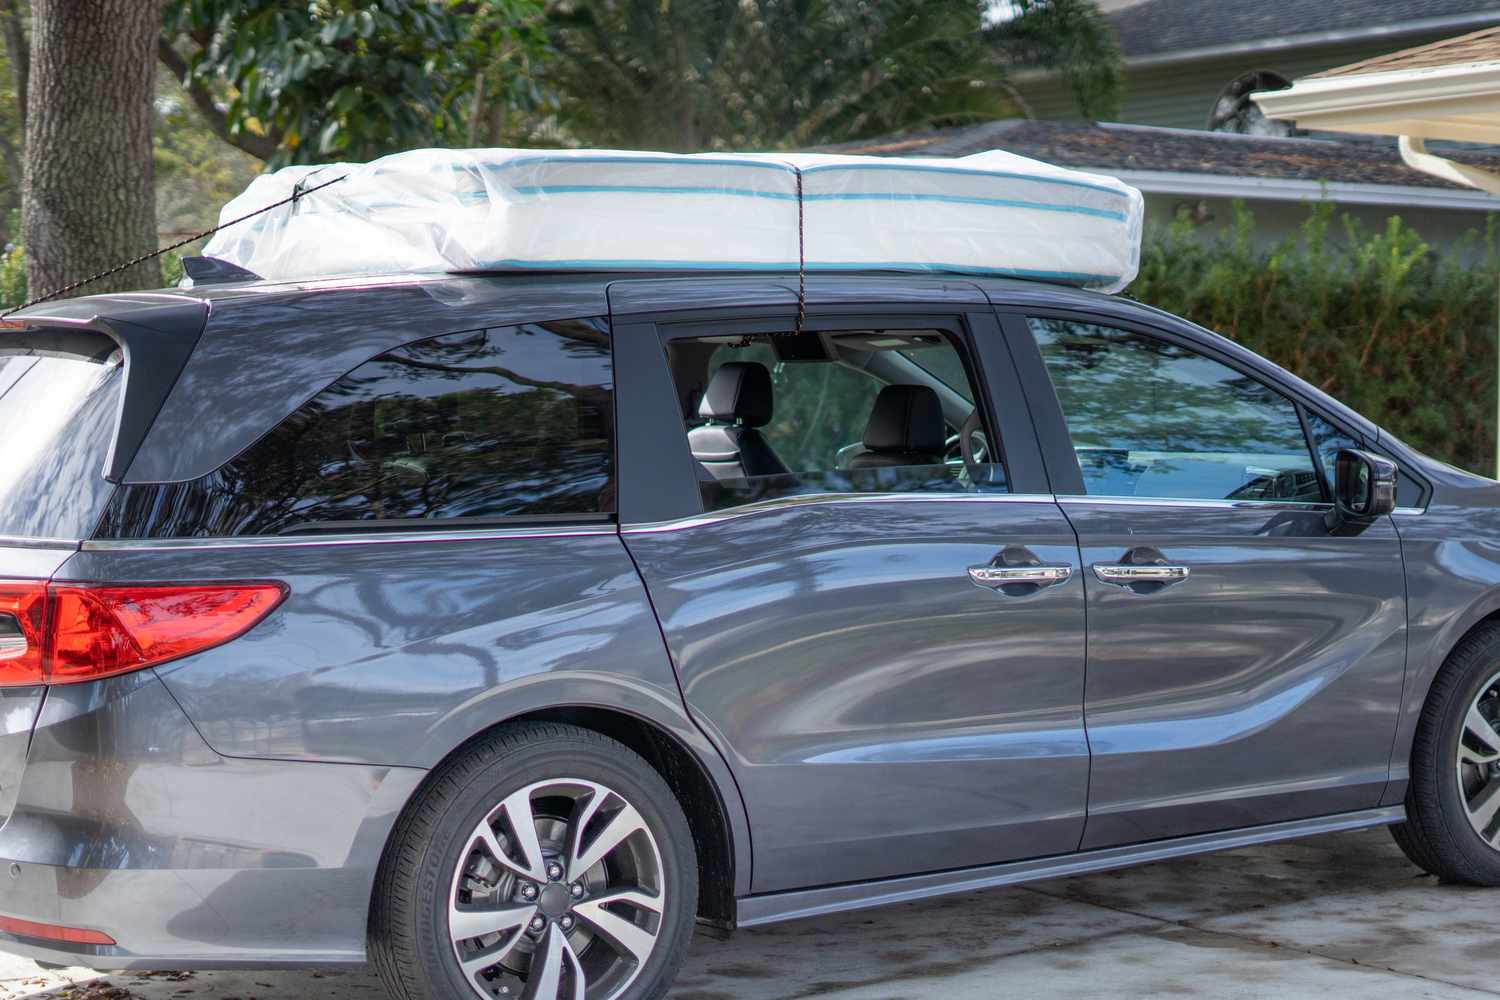 How To Tie A Mattress To The Top Of A Car